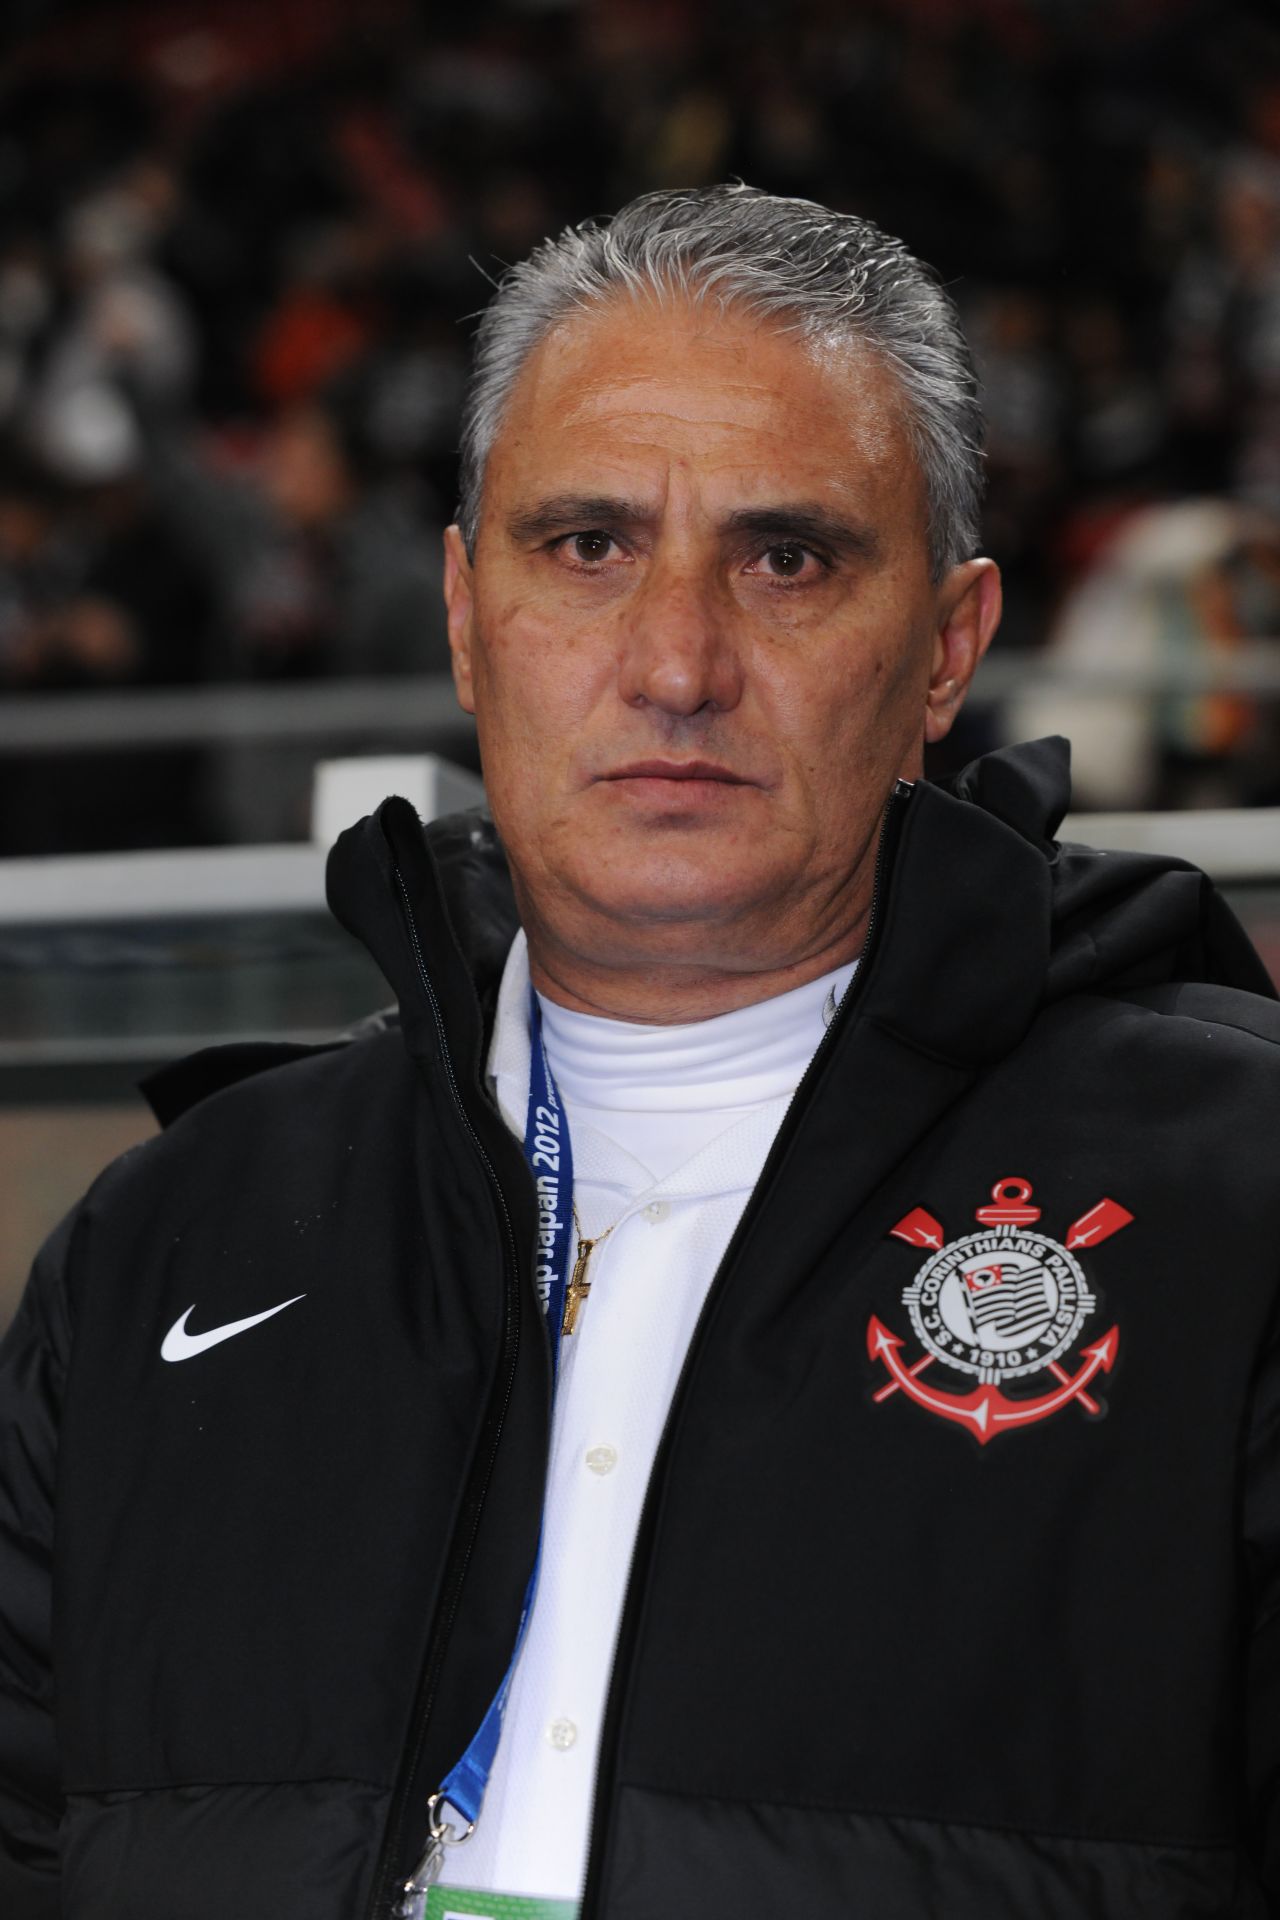 European teams have won the last five editions of the Club World Cup. But Corinthians, who are coached by Tite, go into Sunday's final with plenty of confidence given they were the first unbeaten winners of the Libertadores Cup since 1978.